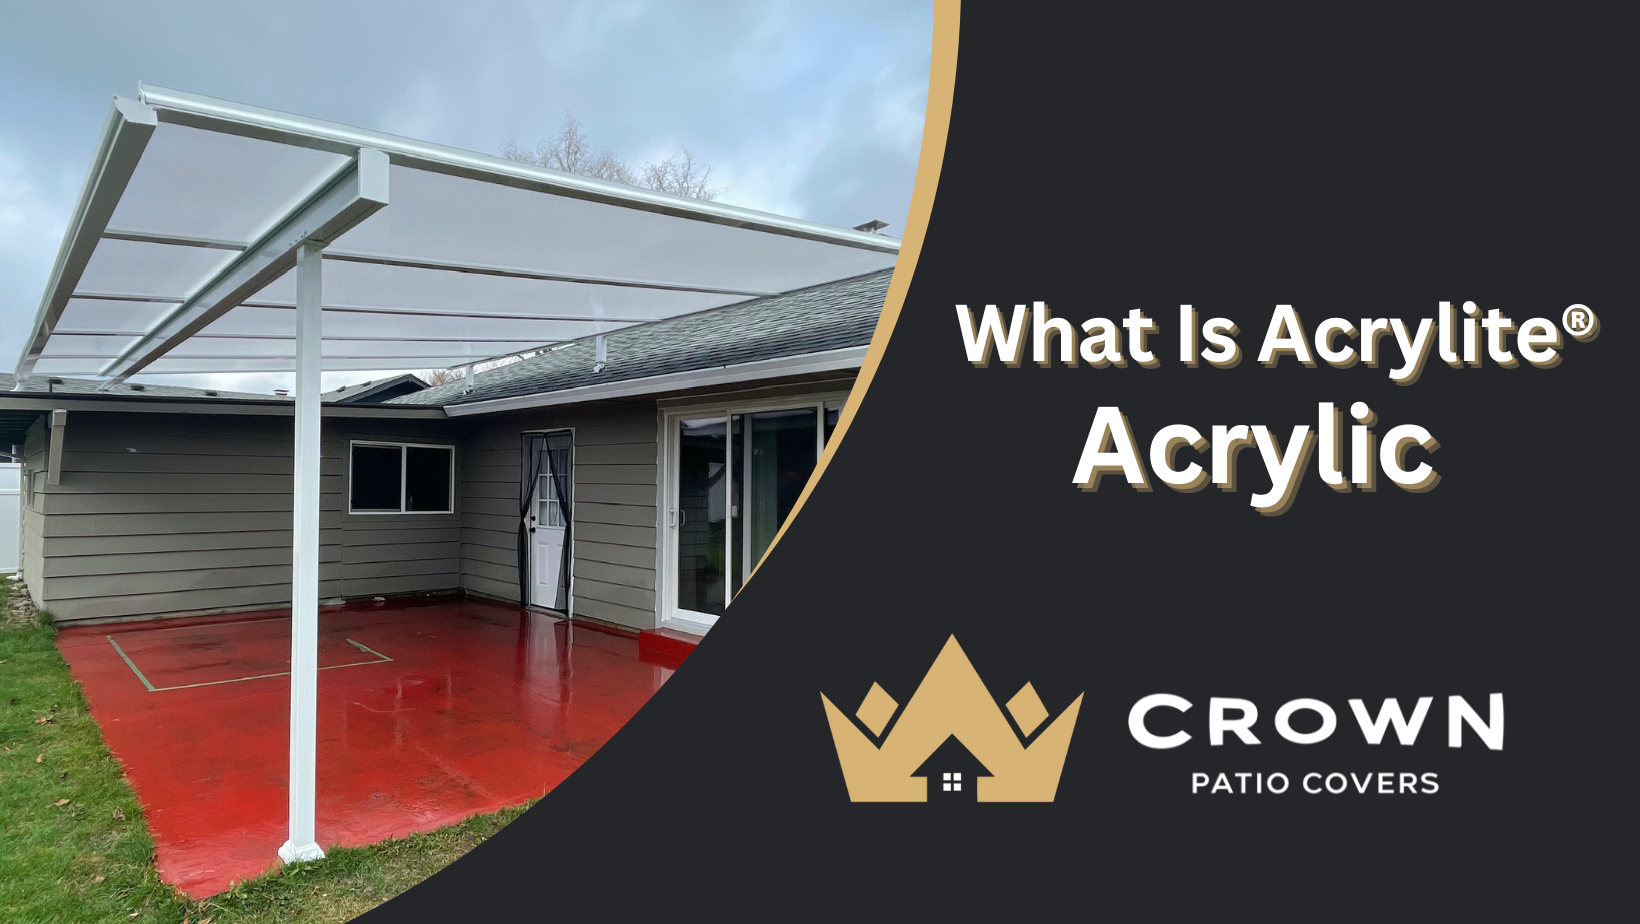 ACRYLITE Patio Covers by Crown Patio Covers in Portland Oregon